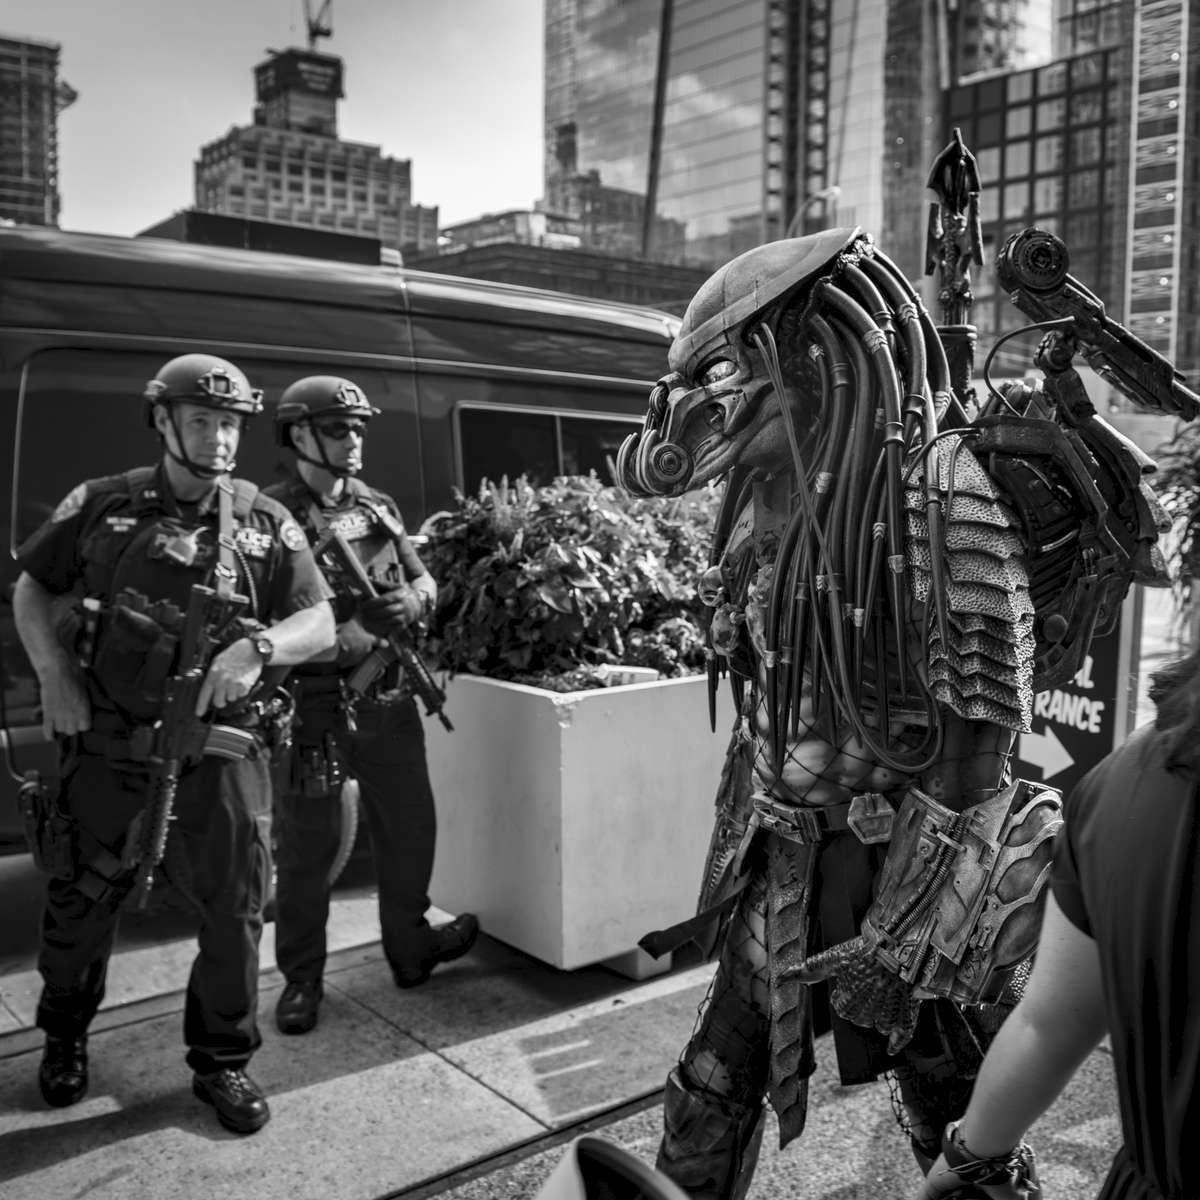 A person wearing the Predator costume, based on the movie Predator starring Arnold Schwarzenegger, walks by members of the NYPD Emergency Service Unit at the New York City Comic Con held at the Jacob K. Javits Convention Center located at 655 W. 34th Street in Manhattan on Friday, October 6, 2017. The New York Comic Con attracts thousand of spectators, comic books and sci-fi fanatics.